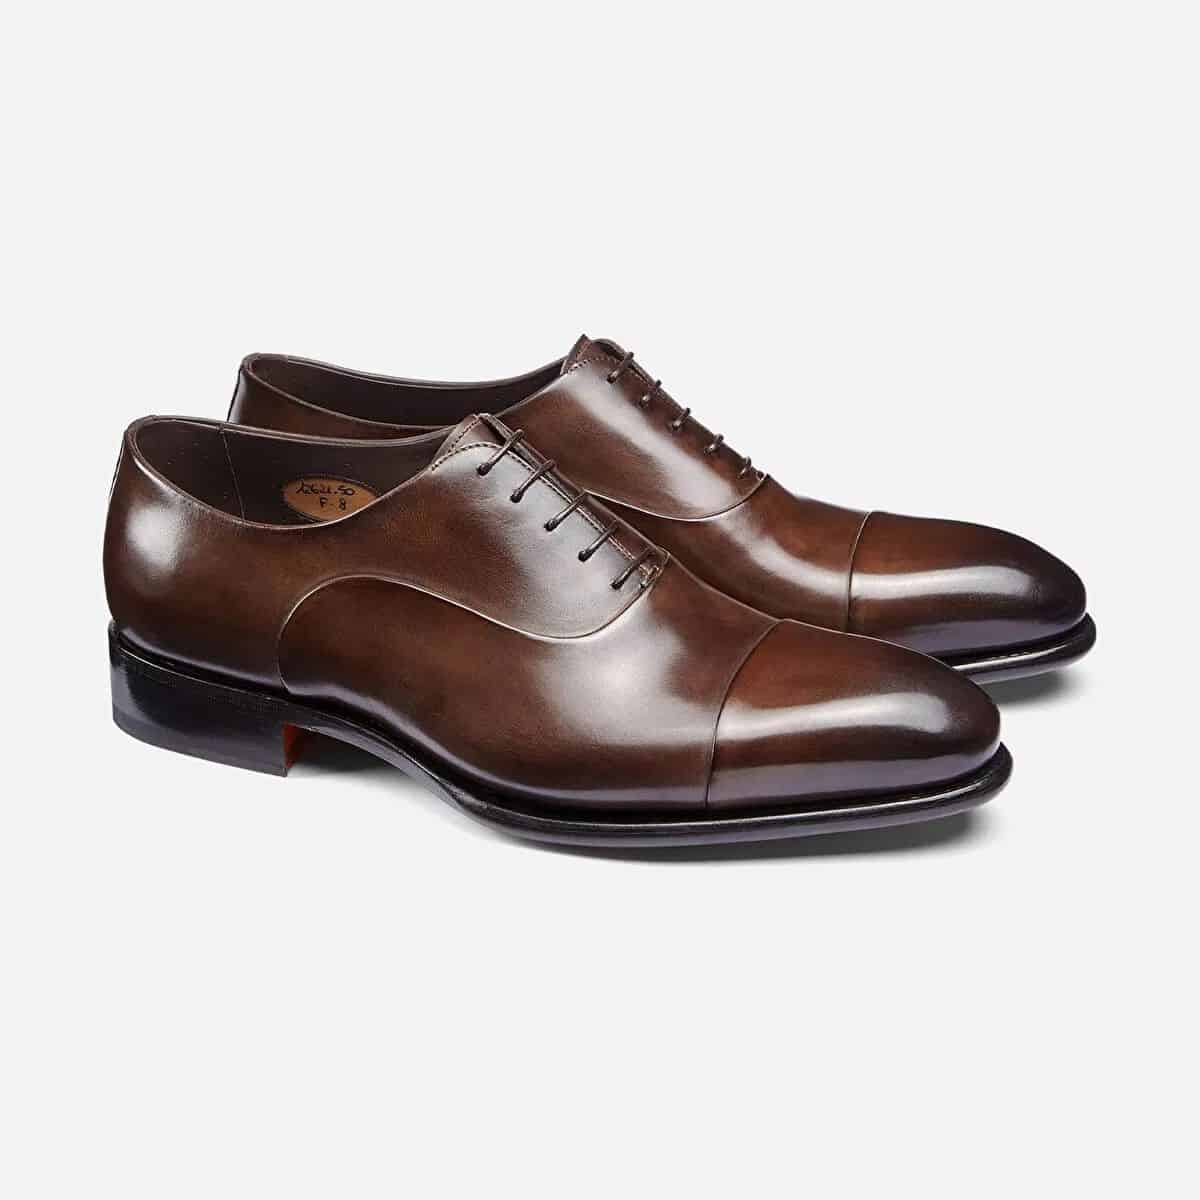 Two dark brown Oxford shoes.